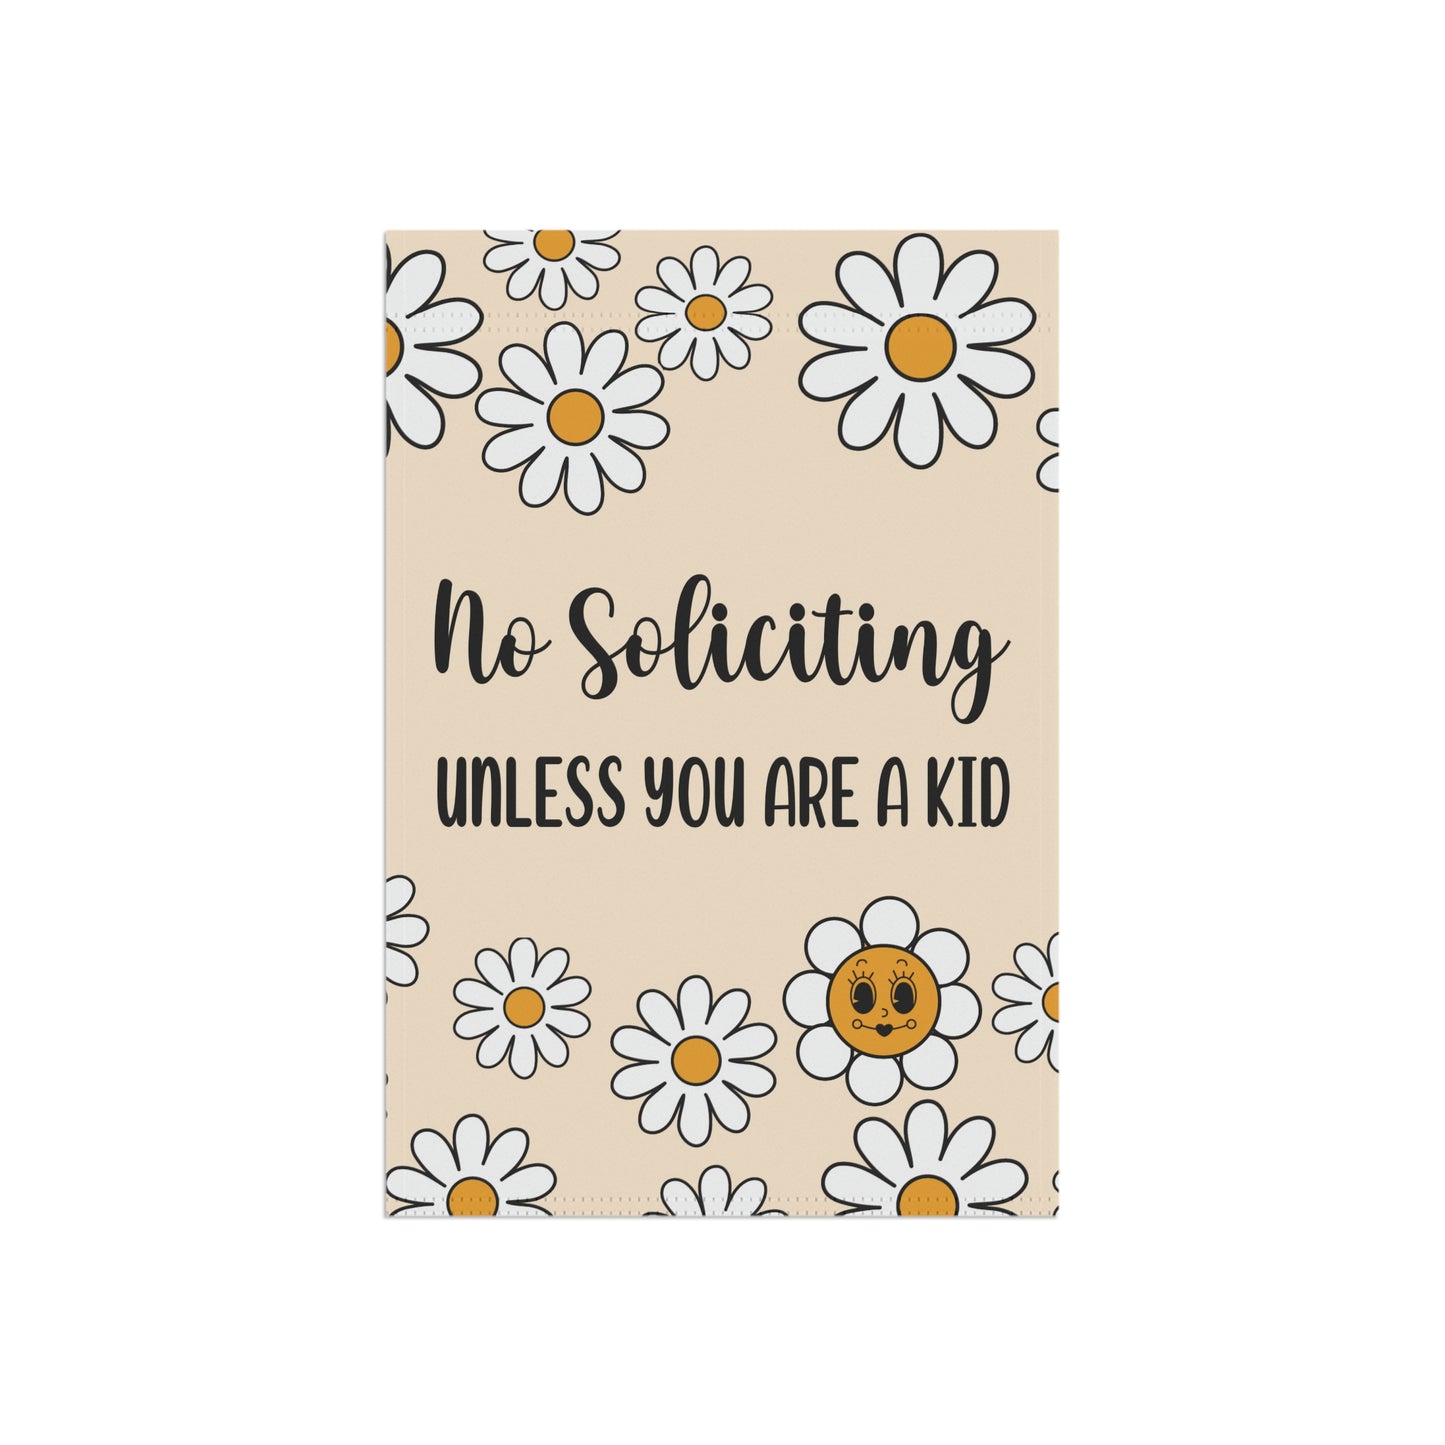 No Soliciting Unless You Are A Kid Retro Styled Garden Flag